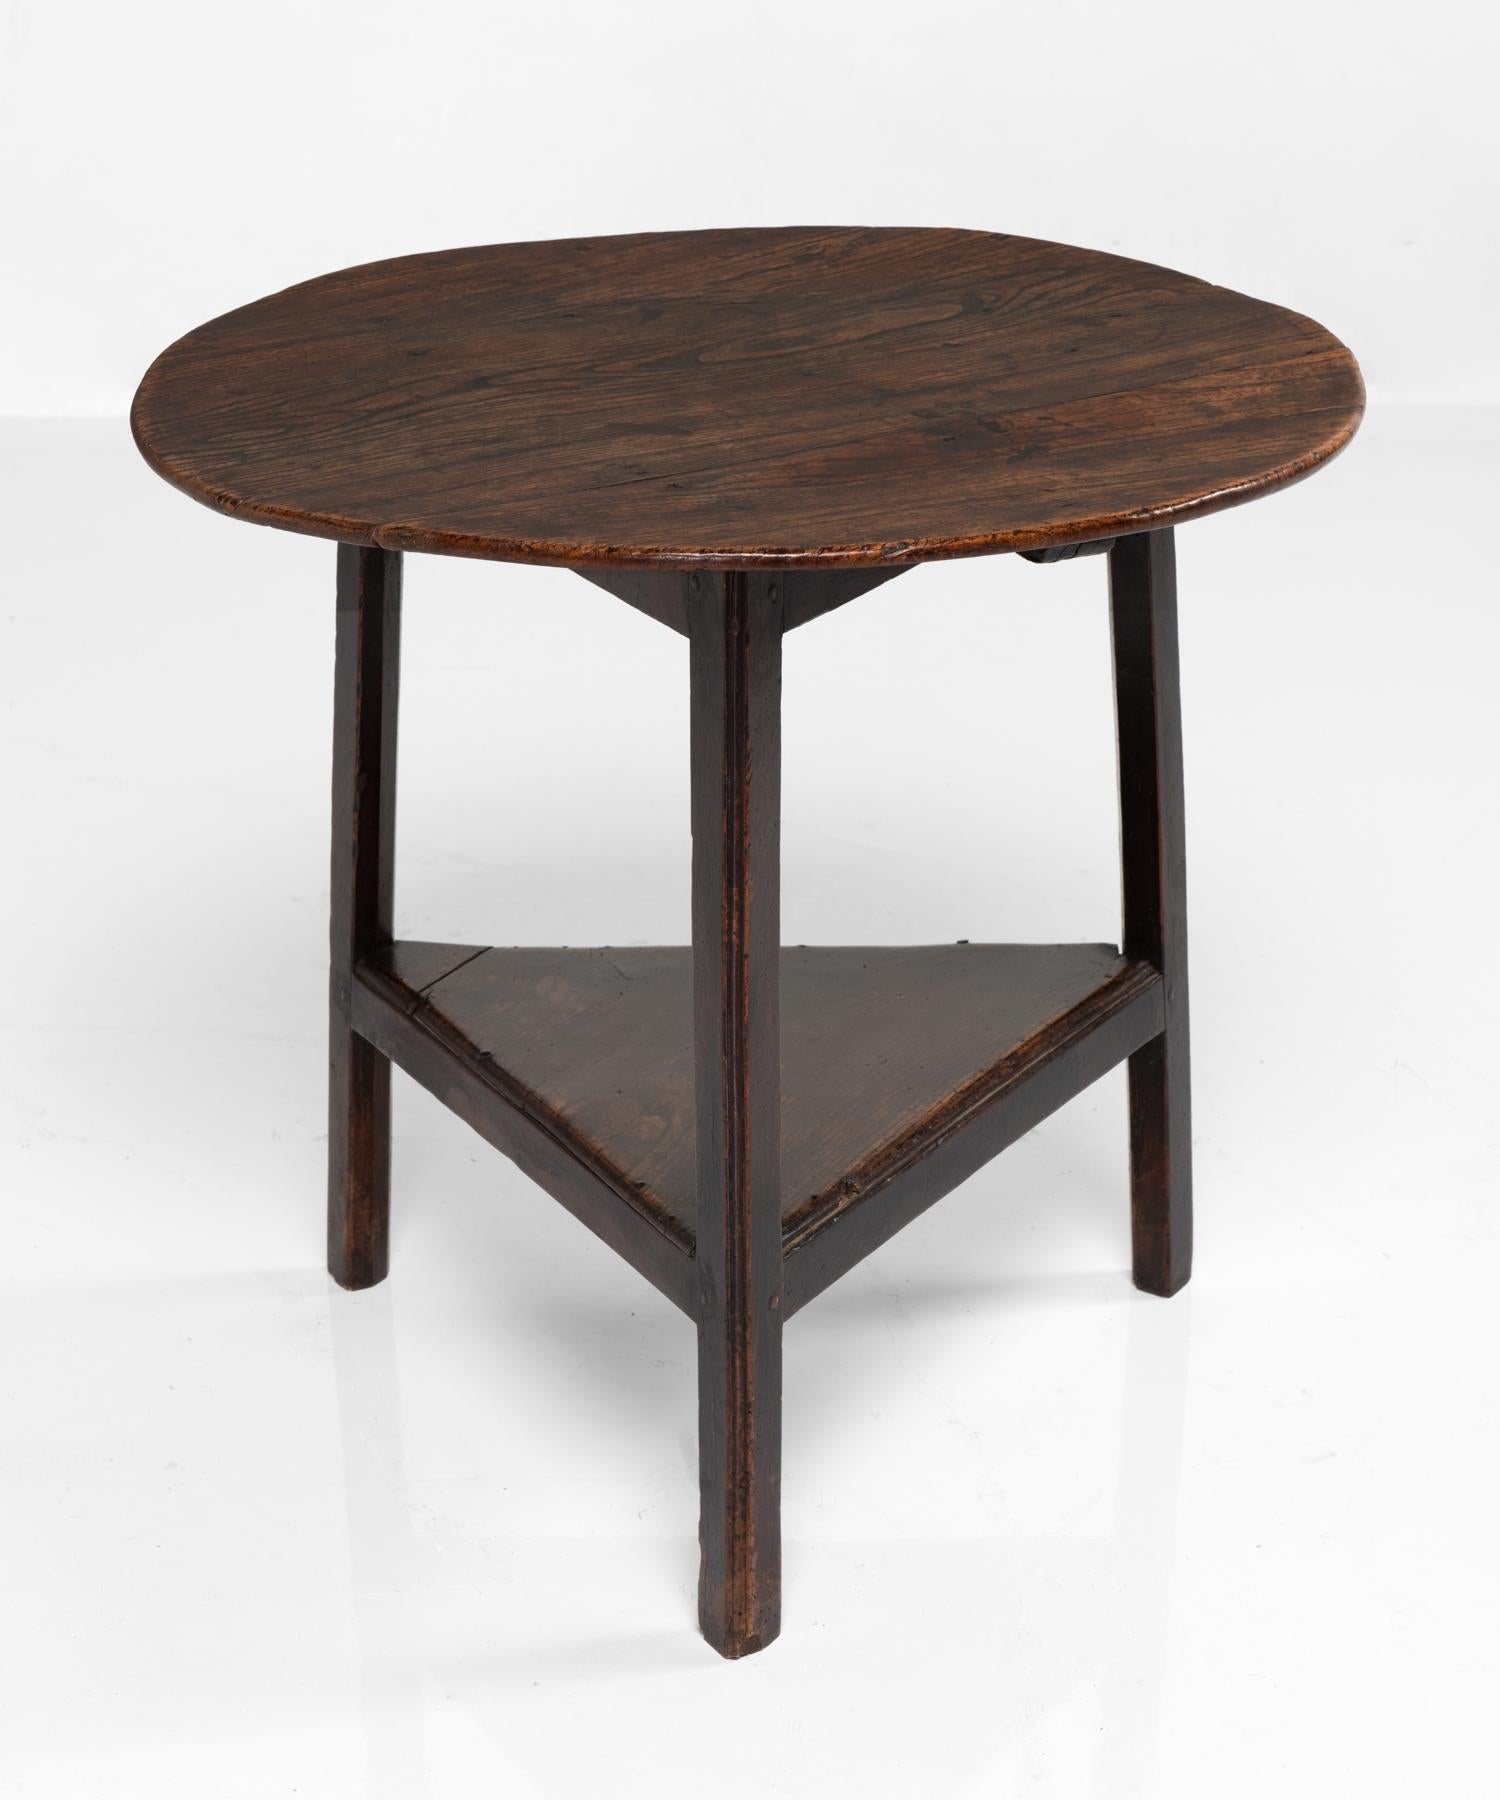 Oak cricket table, England, circa 1750.

Handsome form with low shelf and beautiful patina.